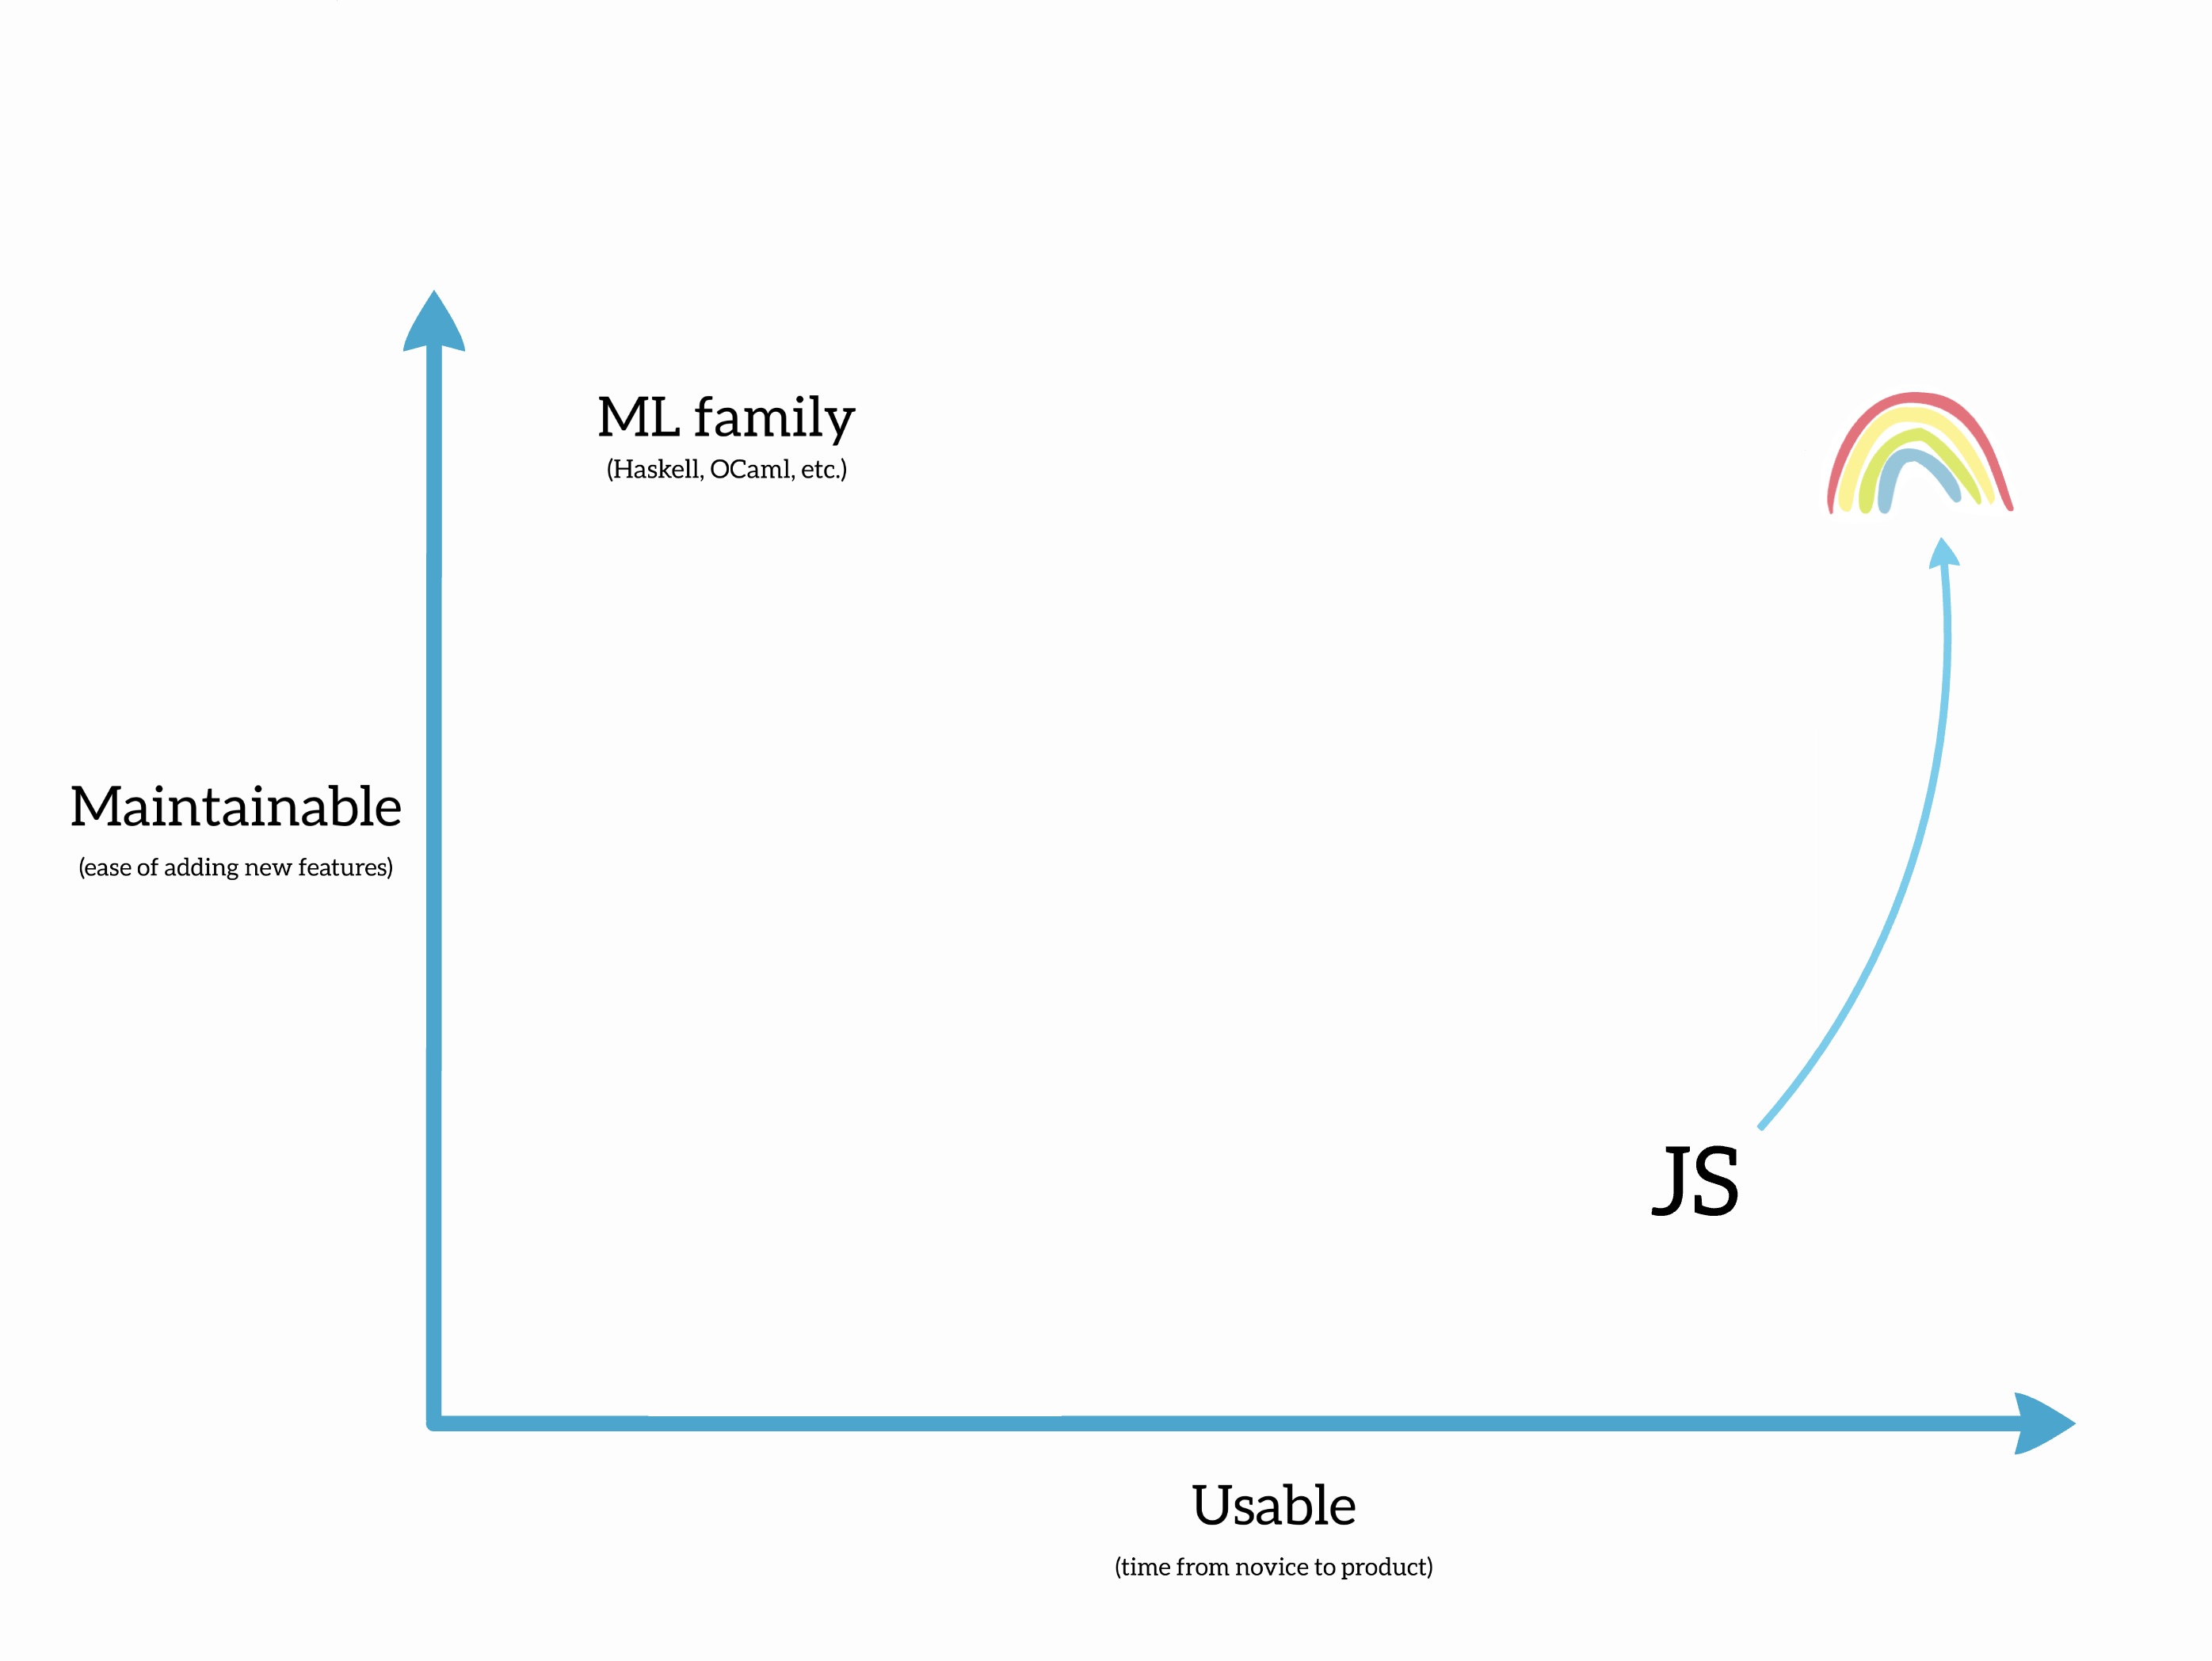 An arrow pointing from JS to a happy rainbow logo